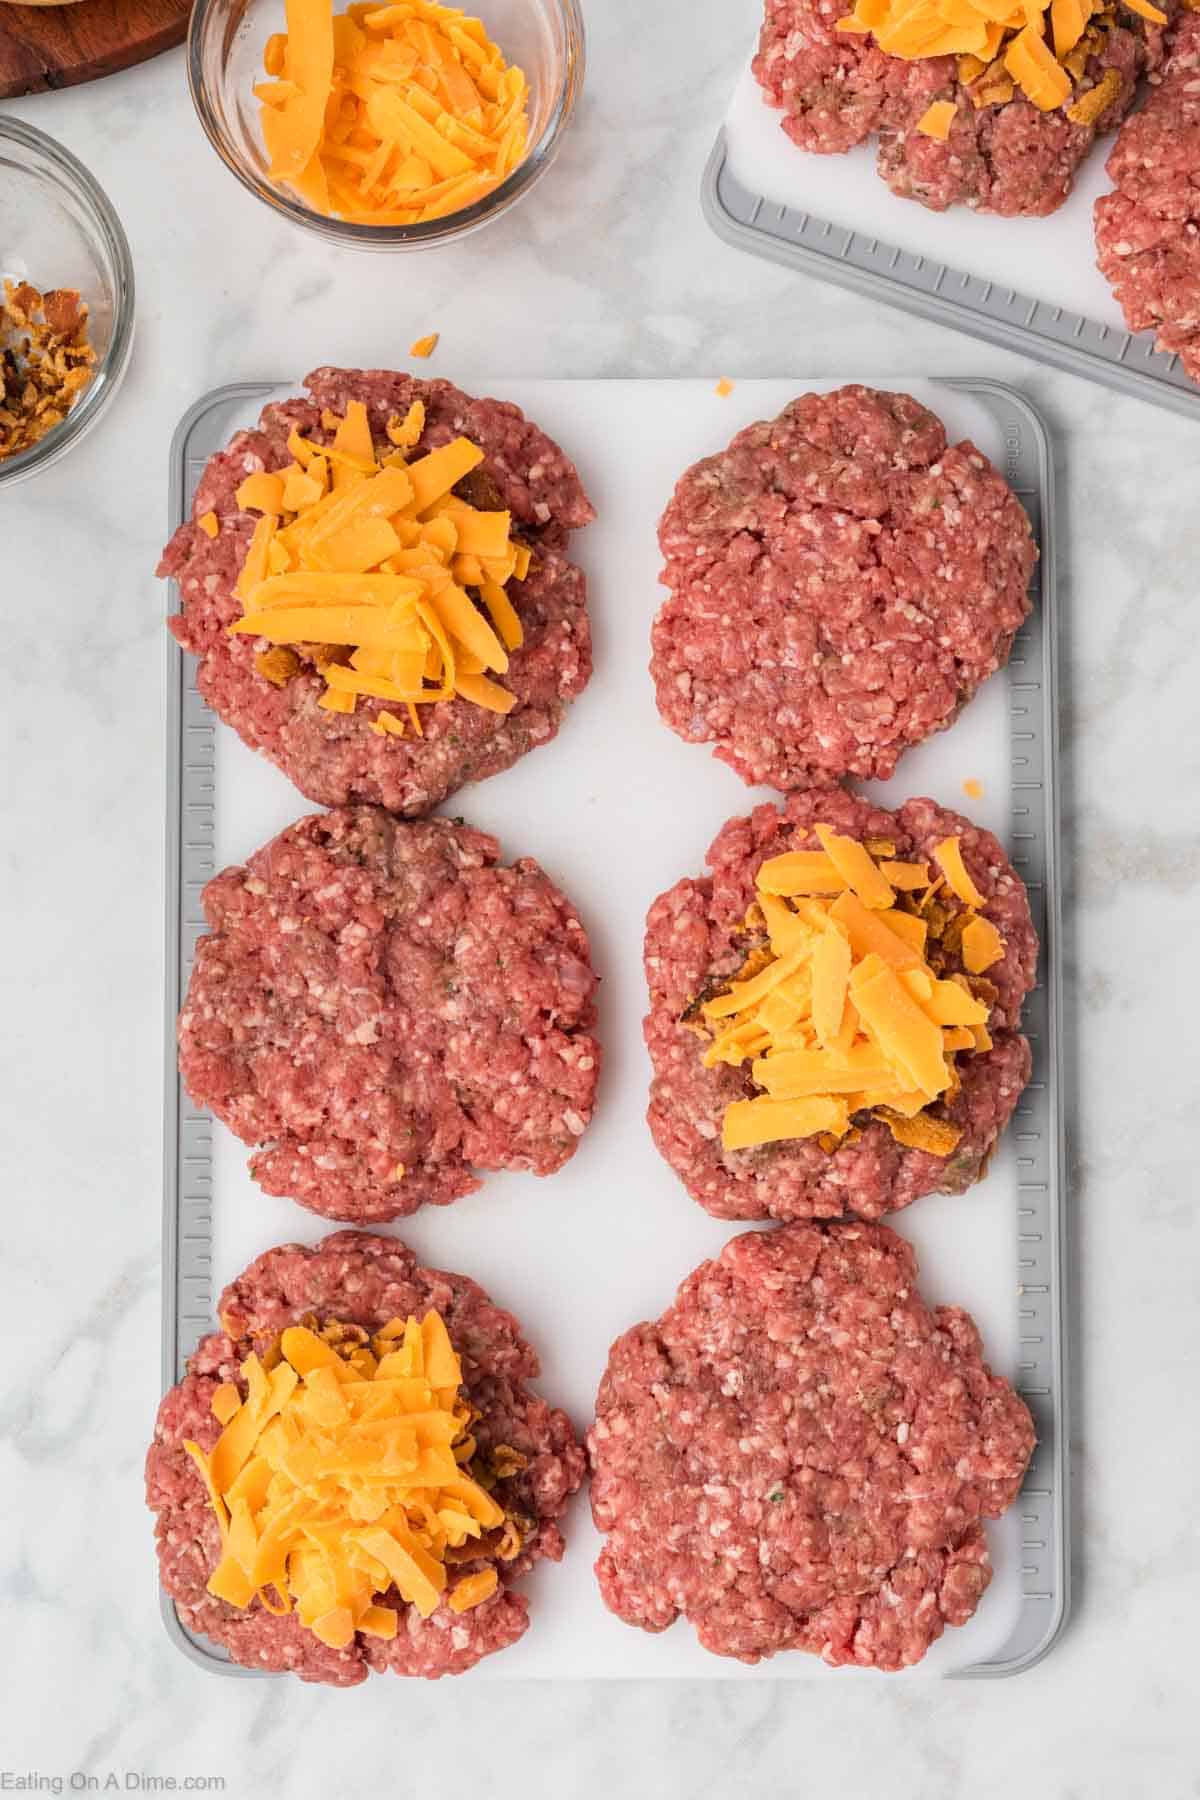 Shredded Cheese on top of ground beef patties on a cutting board